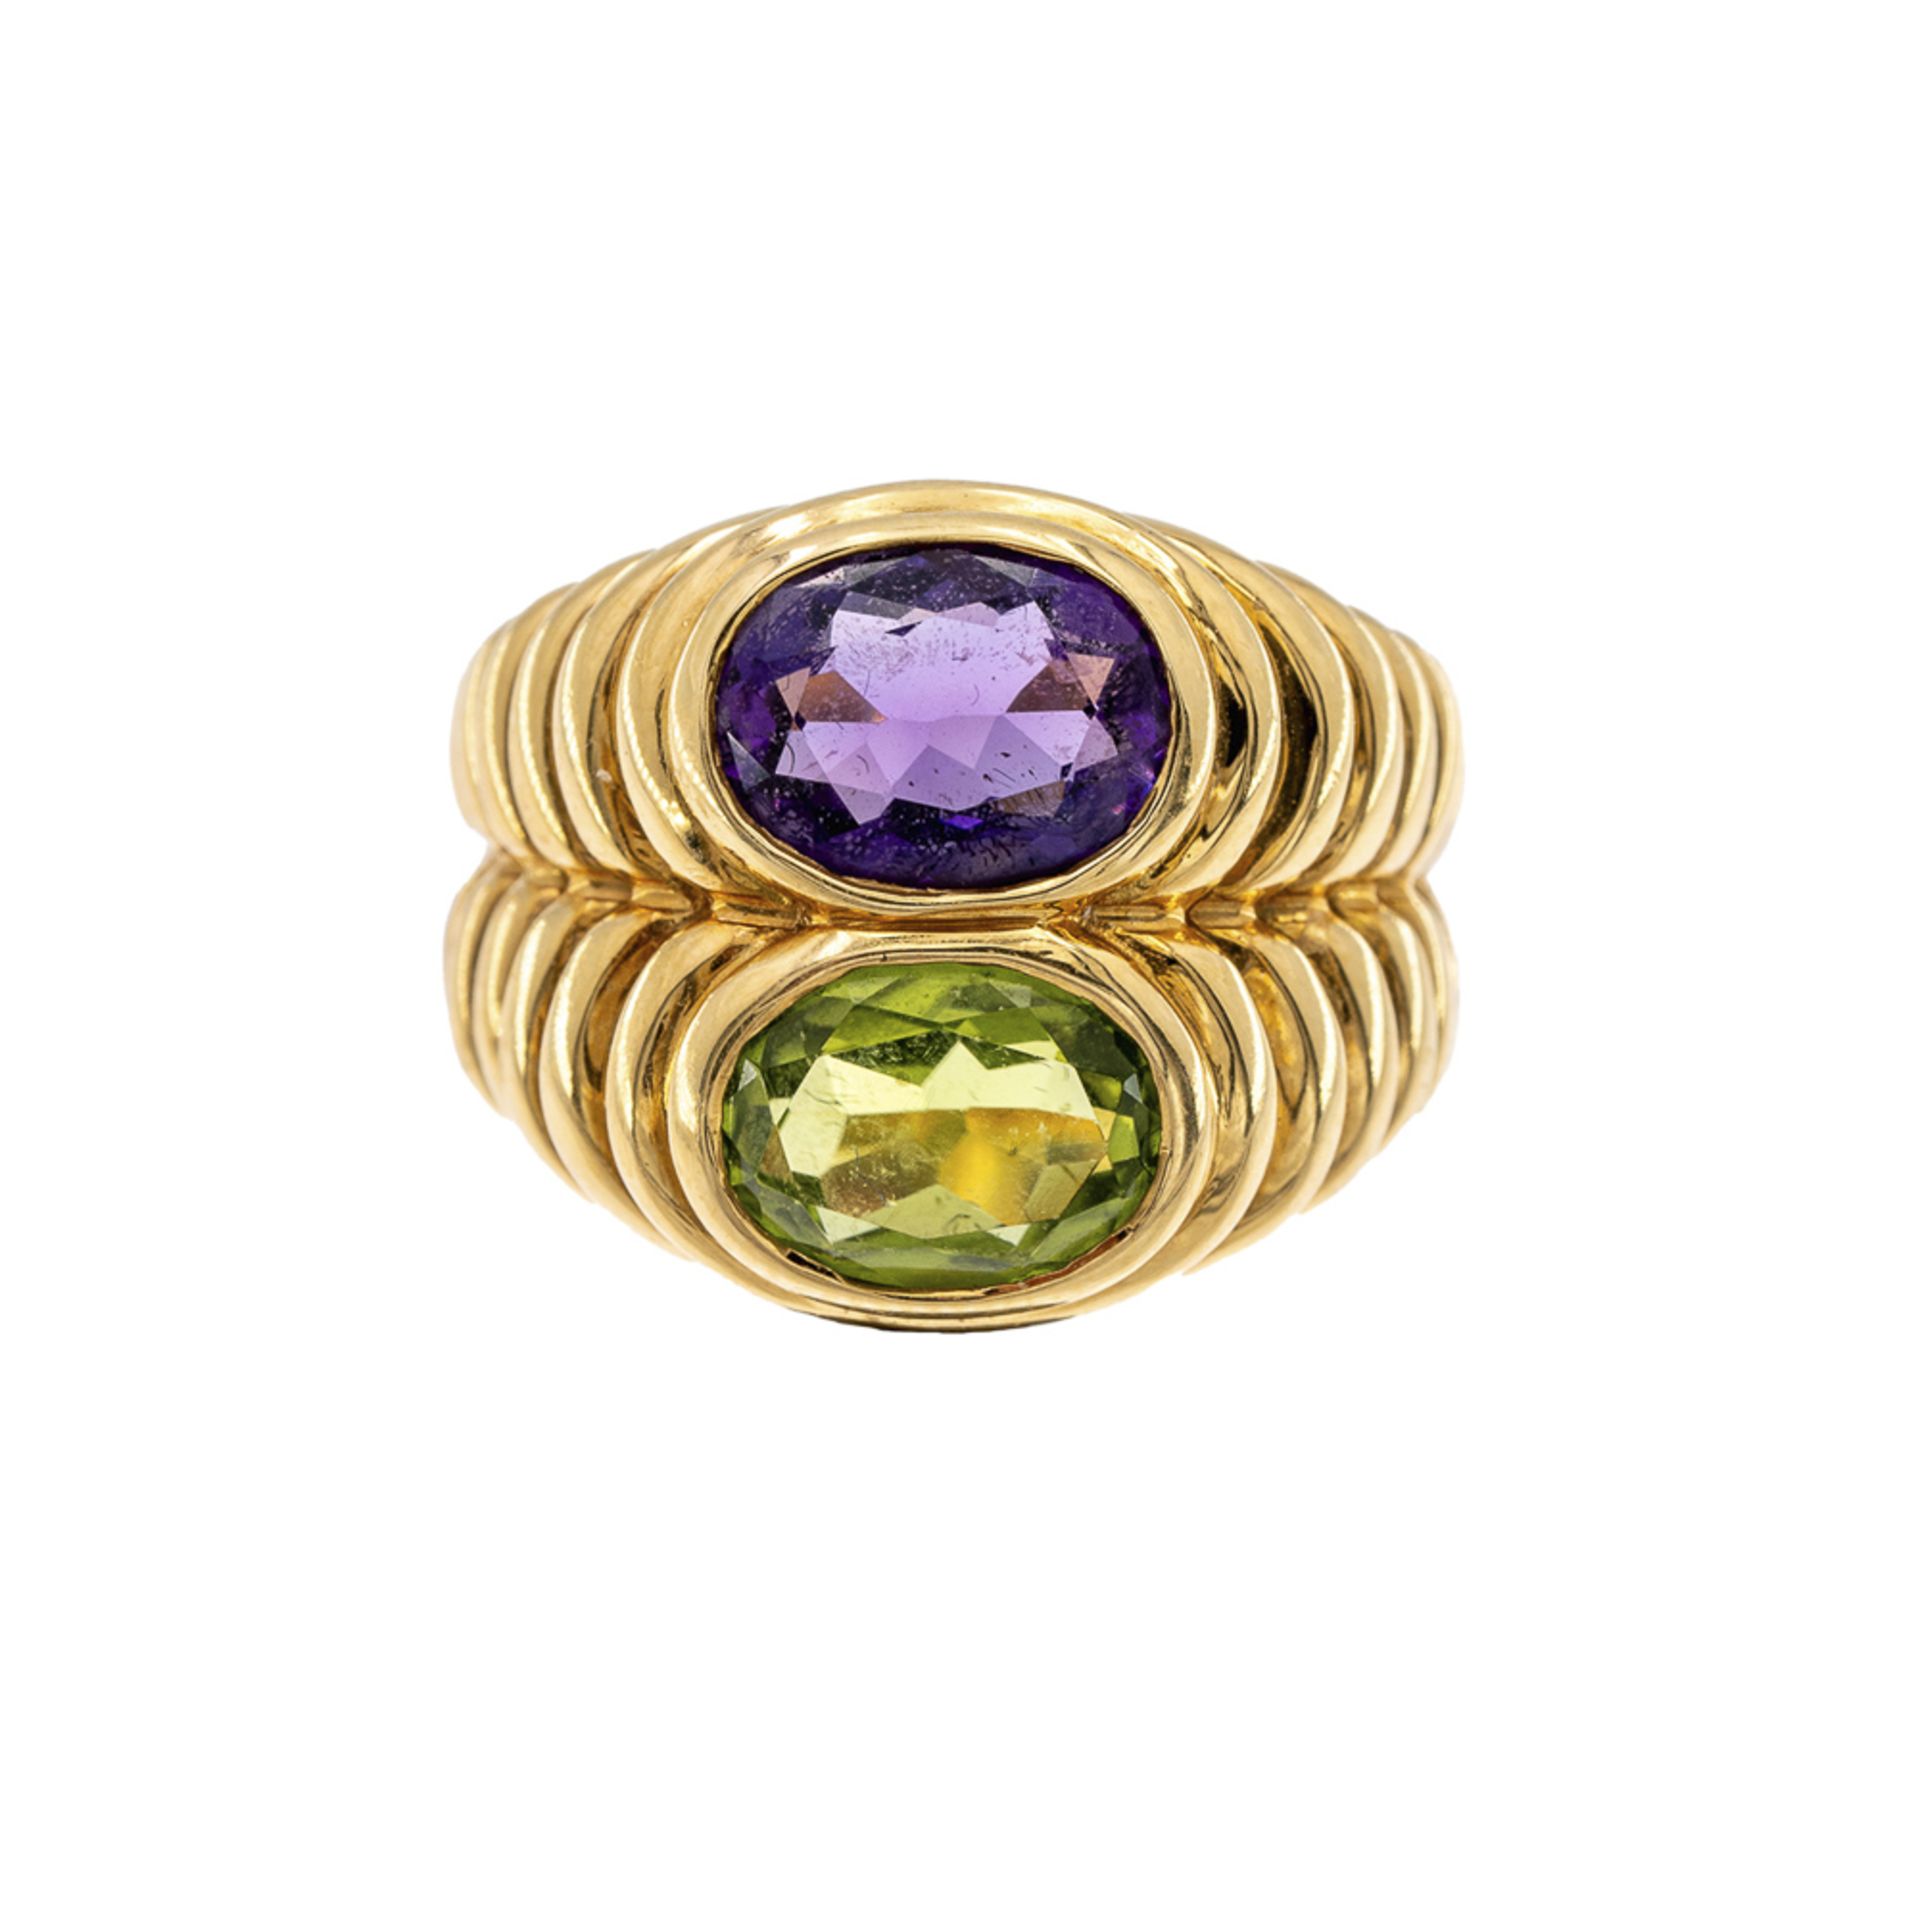 Bulgari Double Baccellato collection ring - Image 2 of 3